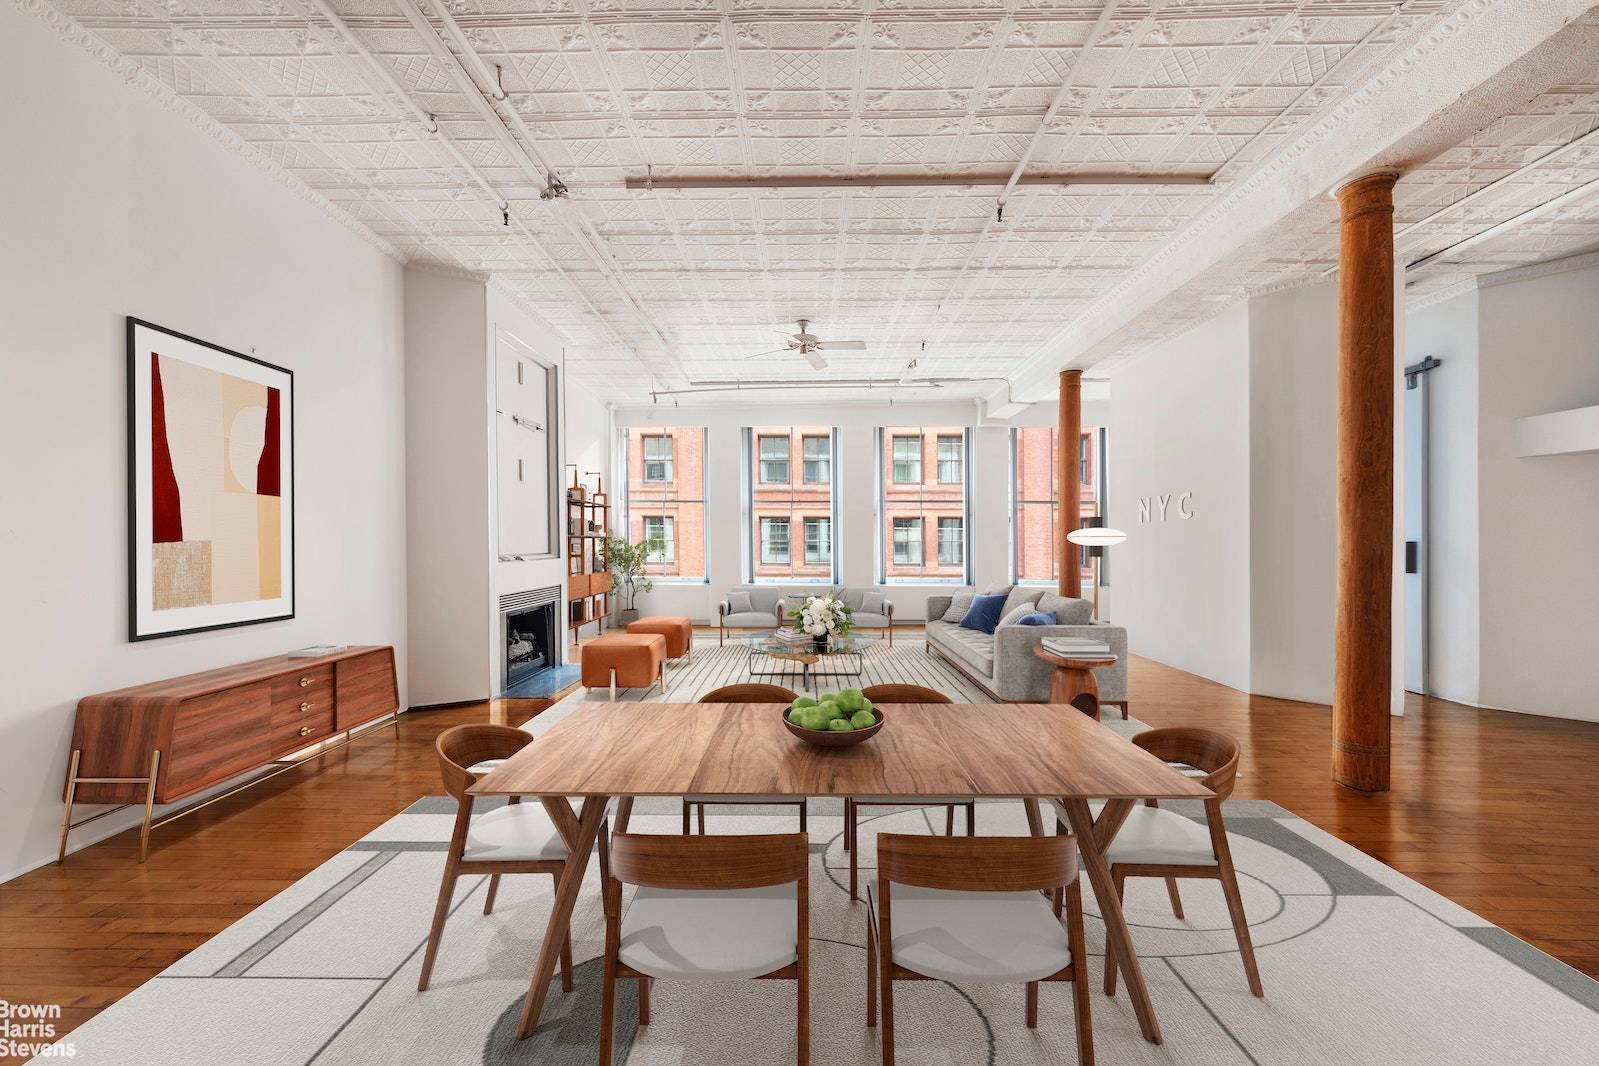 1st sale in 48 years. This rare 40' X 60' full floor loft is located right in the heart of Soho and features grand proportions with beautifully preserved details throughout ...